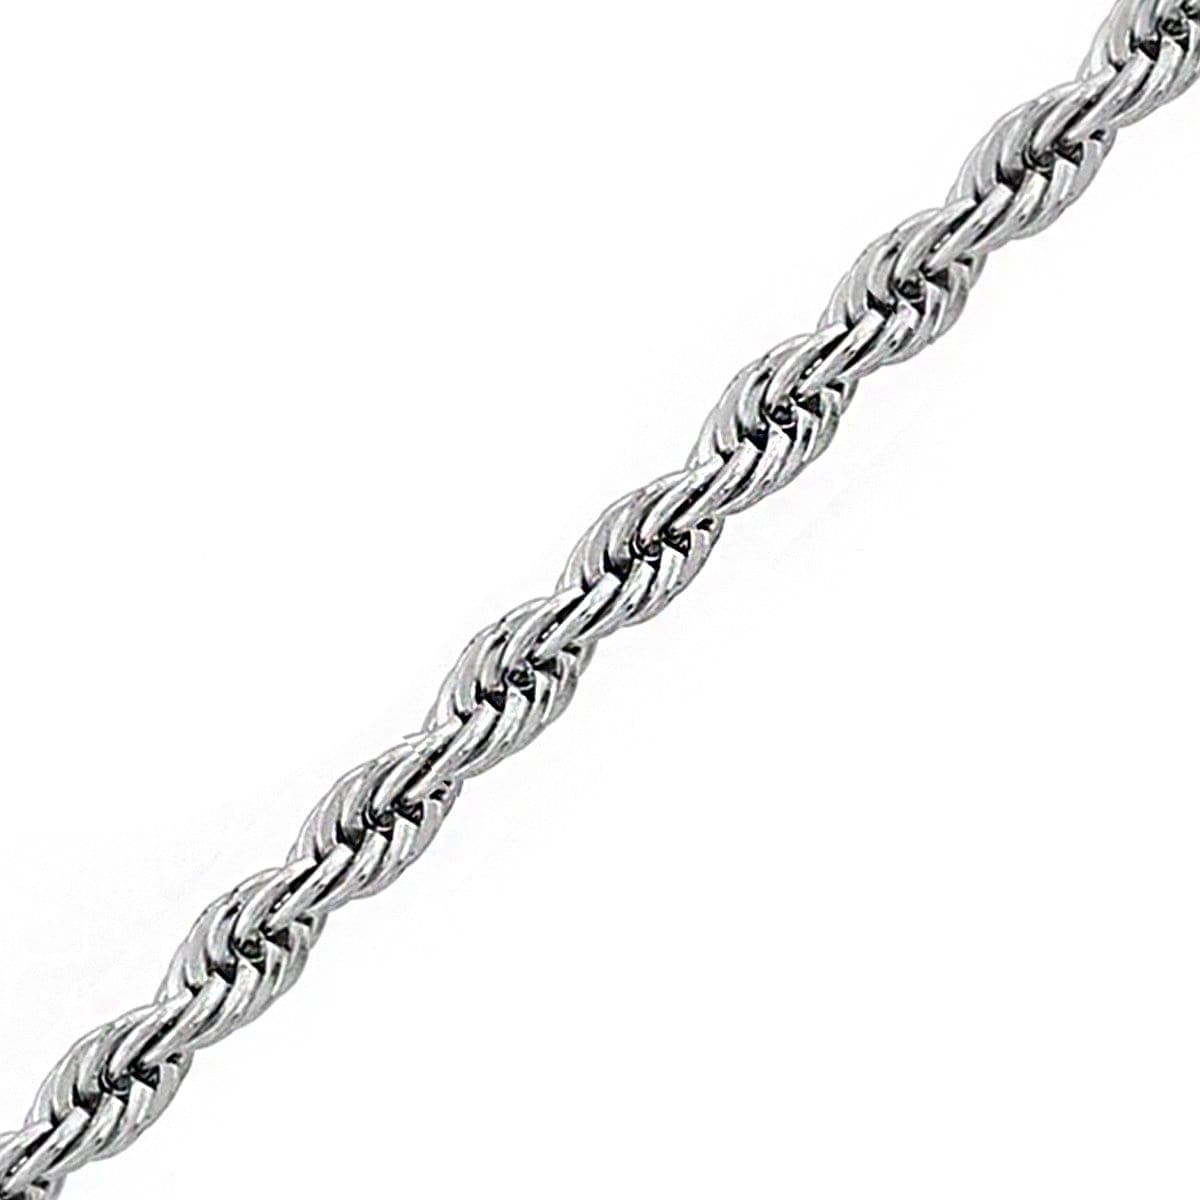 INOX JEWELRY Chains Silver Tone Stainless Steel 5mm French Rope Chain NSTC050-30